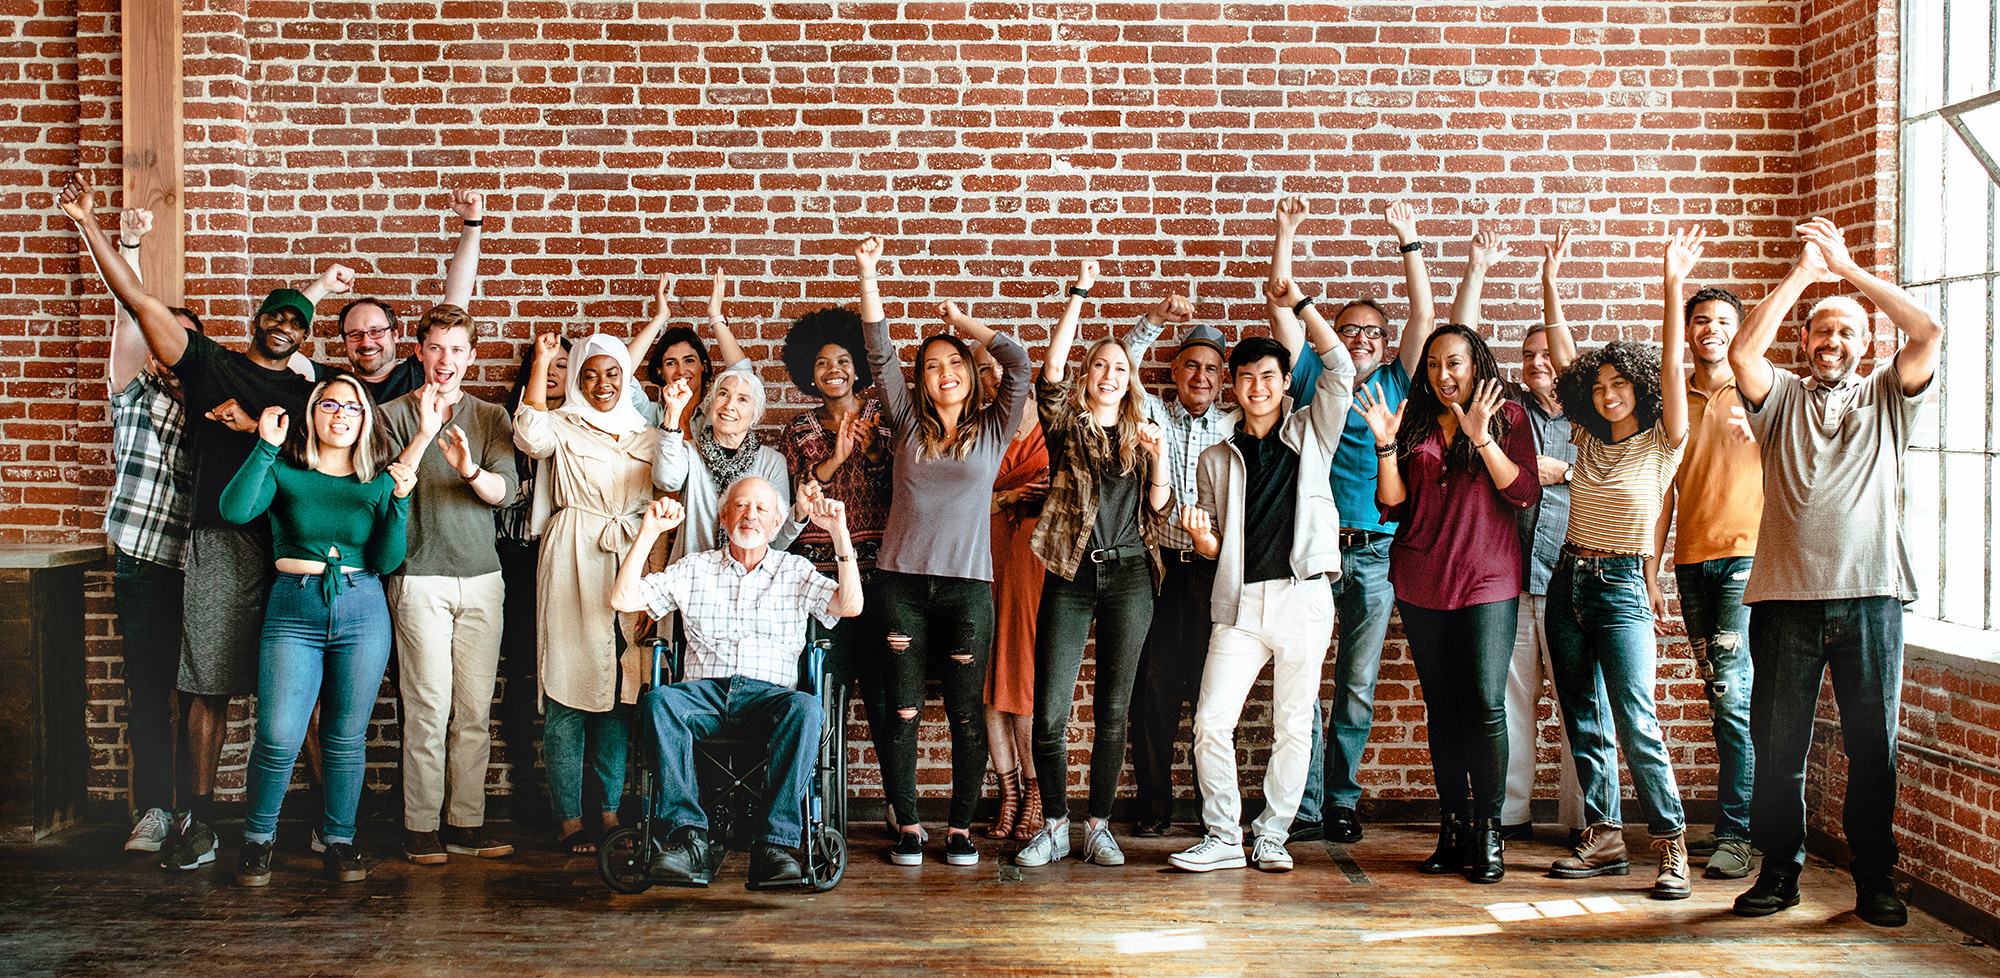 A diverse group of people in front of a brick wall with their arms raised in celebration.